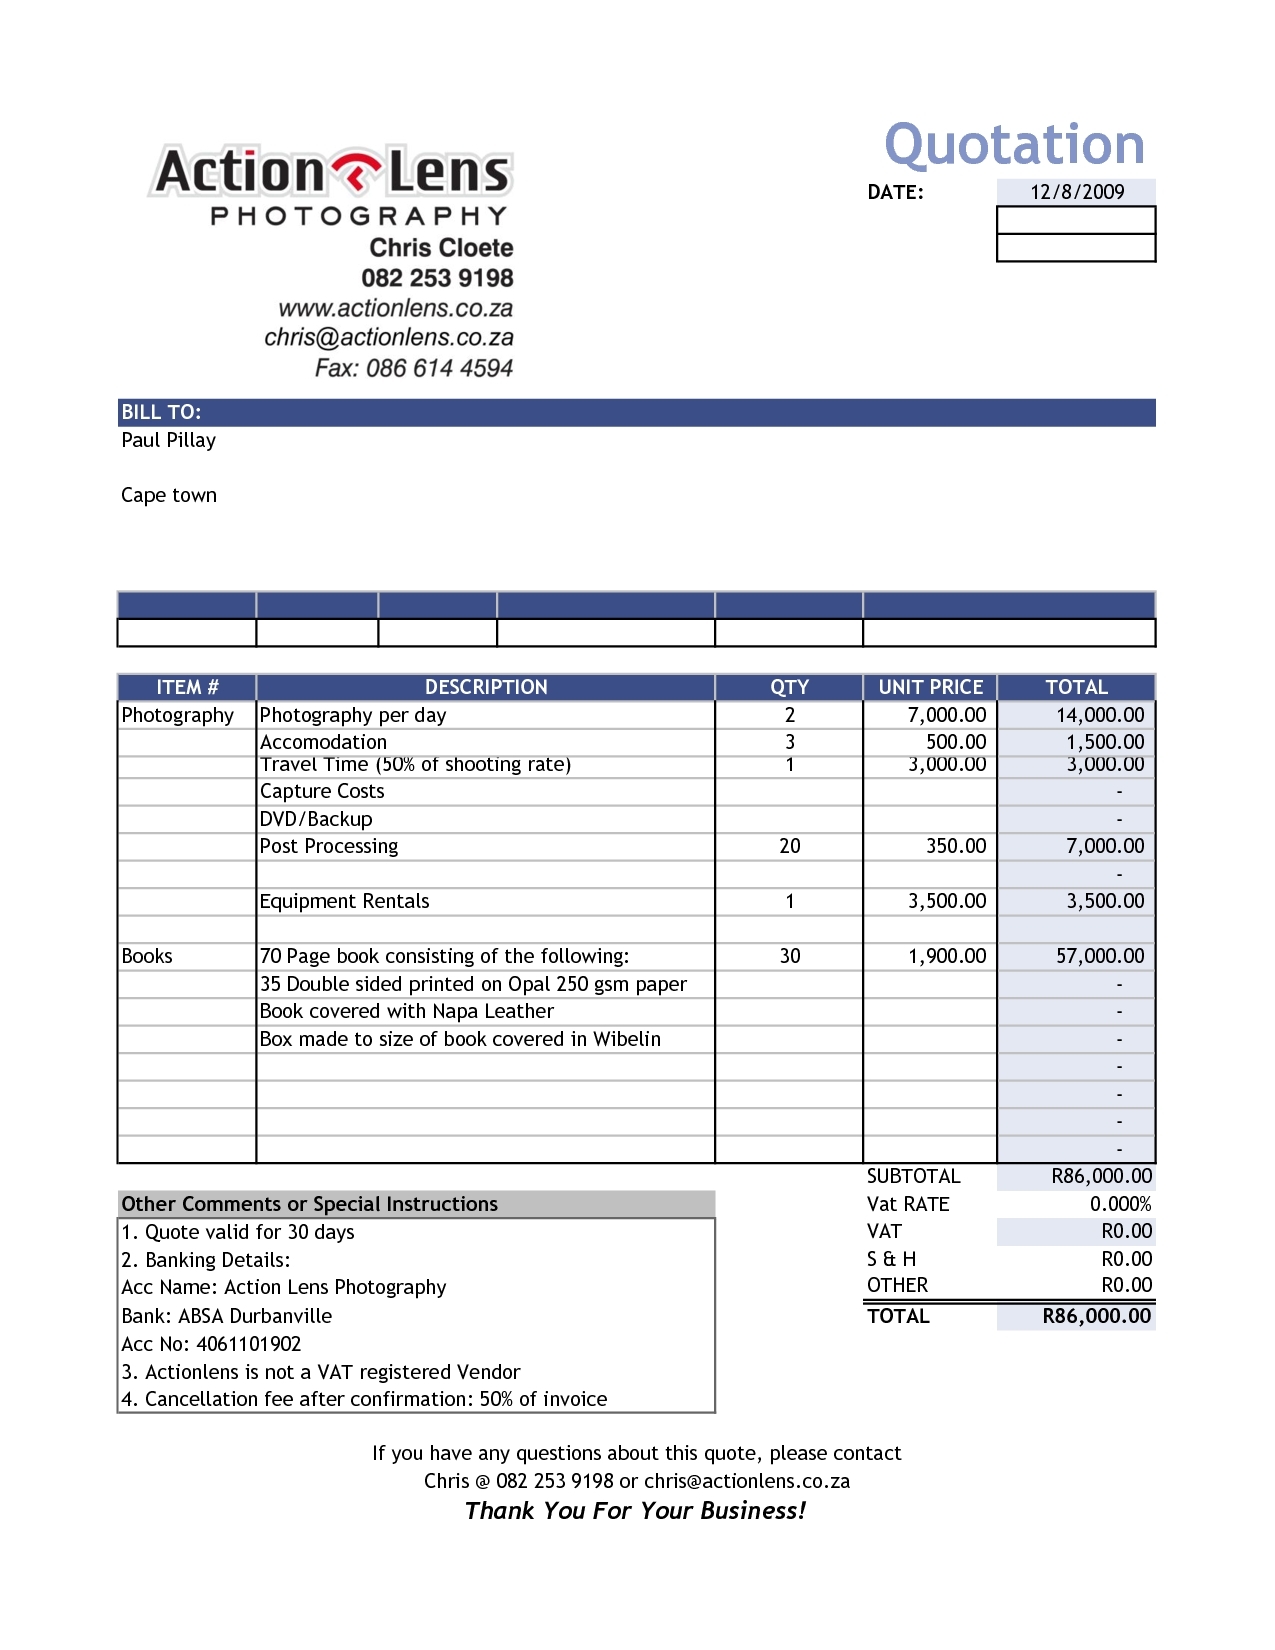 sales invoice template invoice templat free sales invoice template sales invoices should be